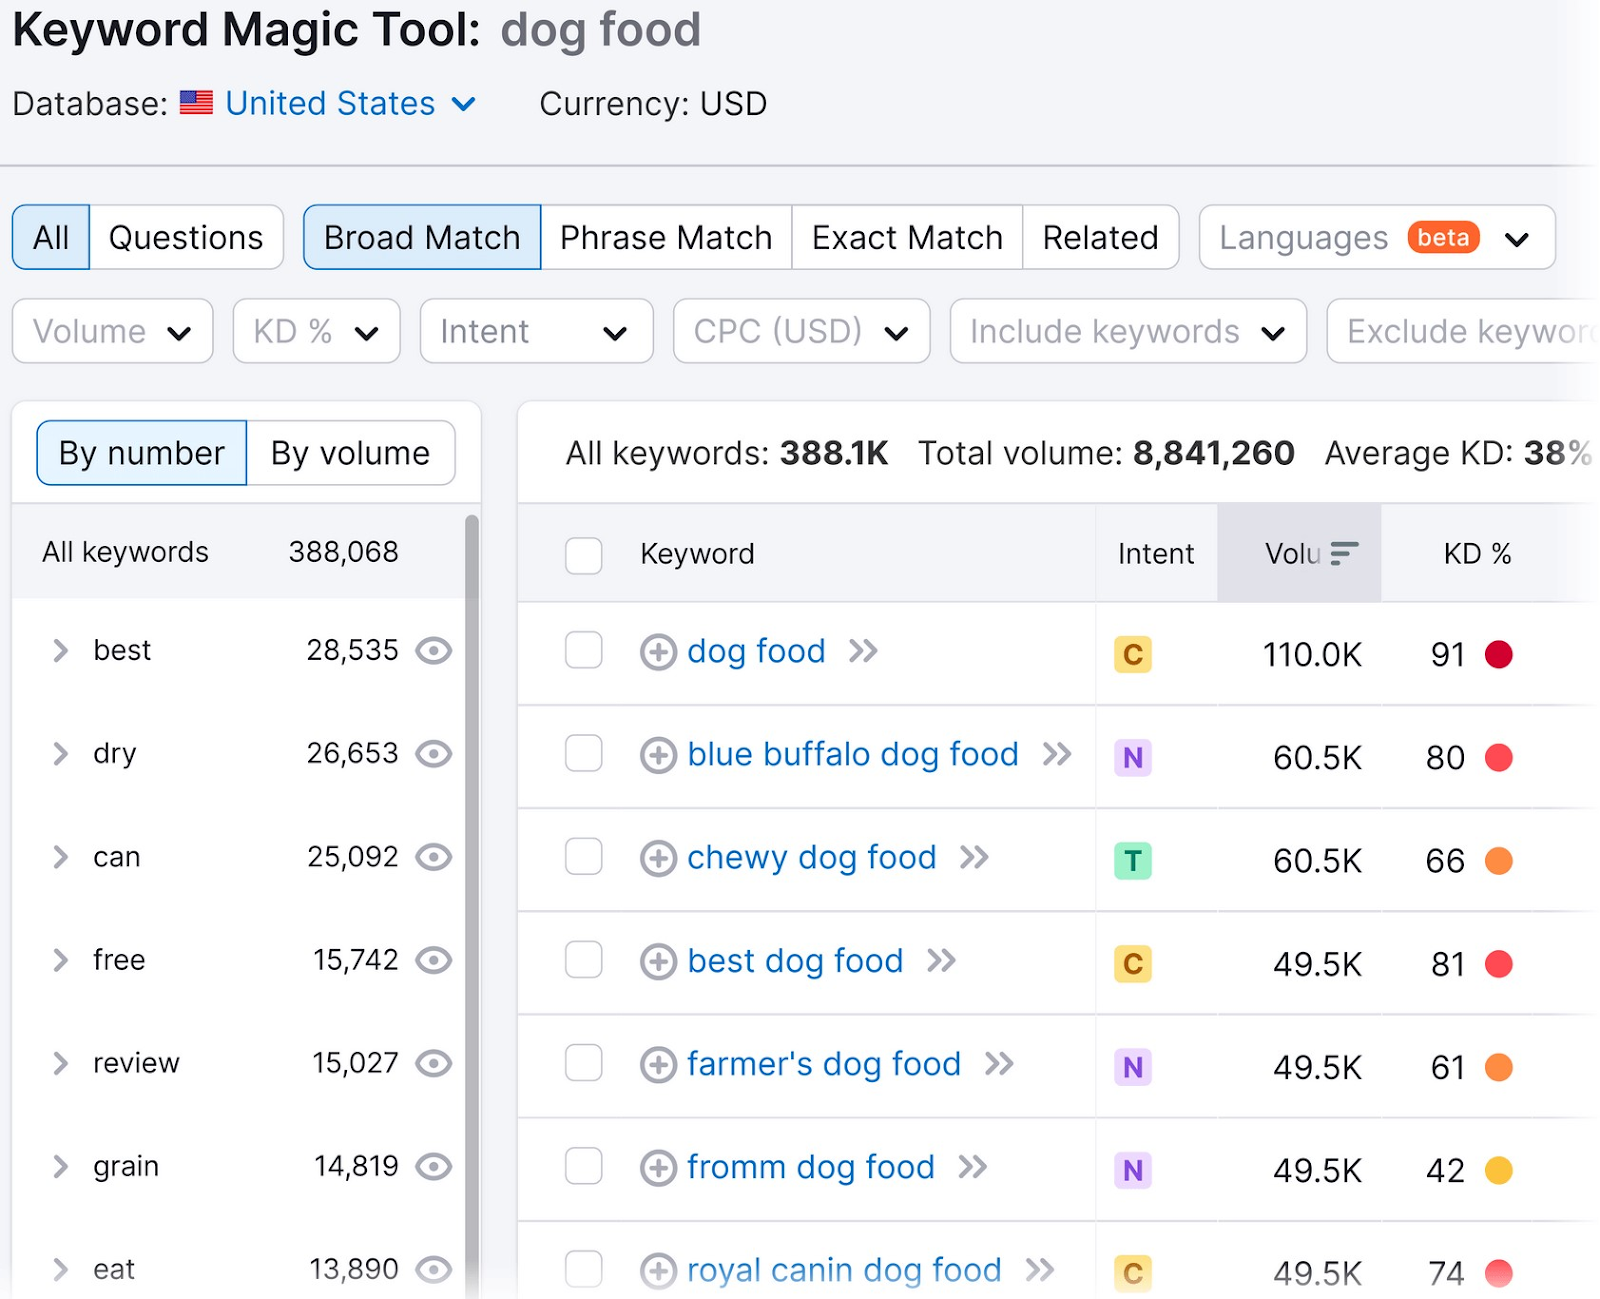 a list with keyword suggestions based on "dog food" search in the US